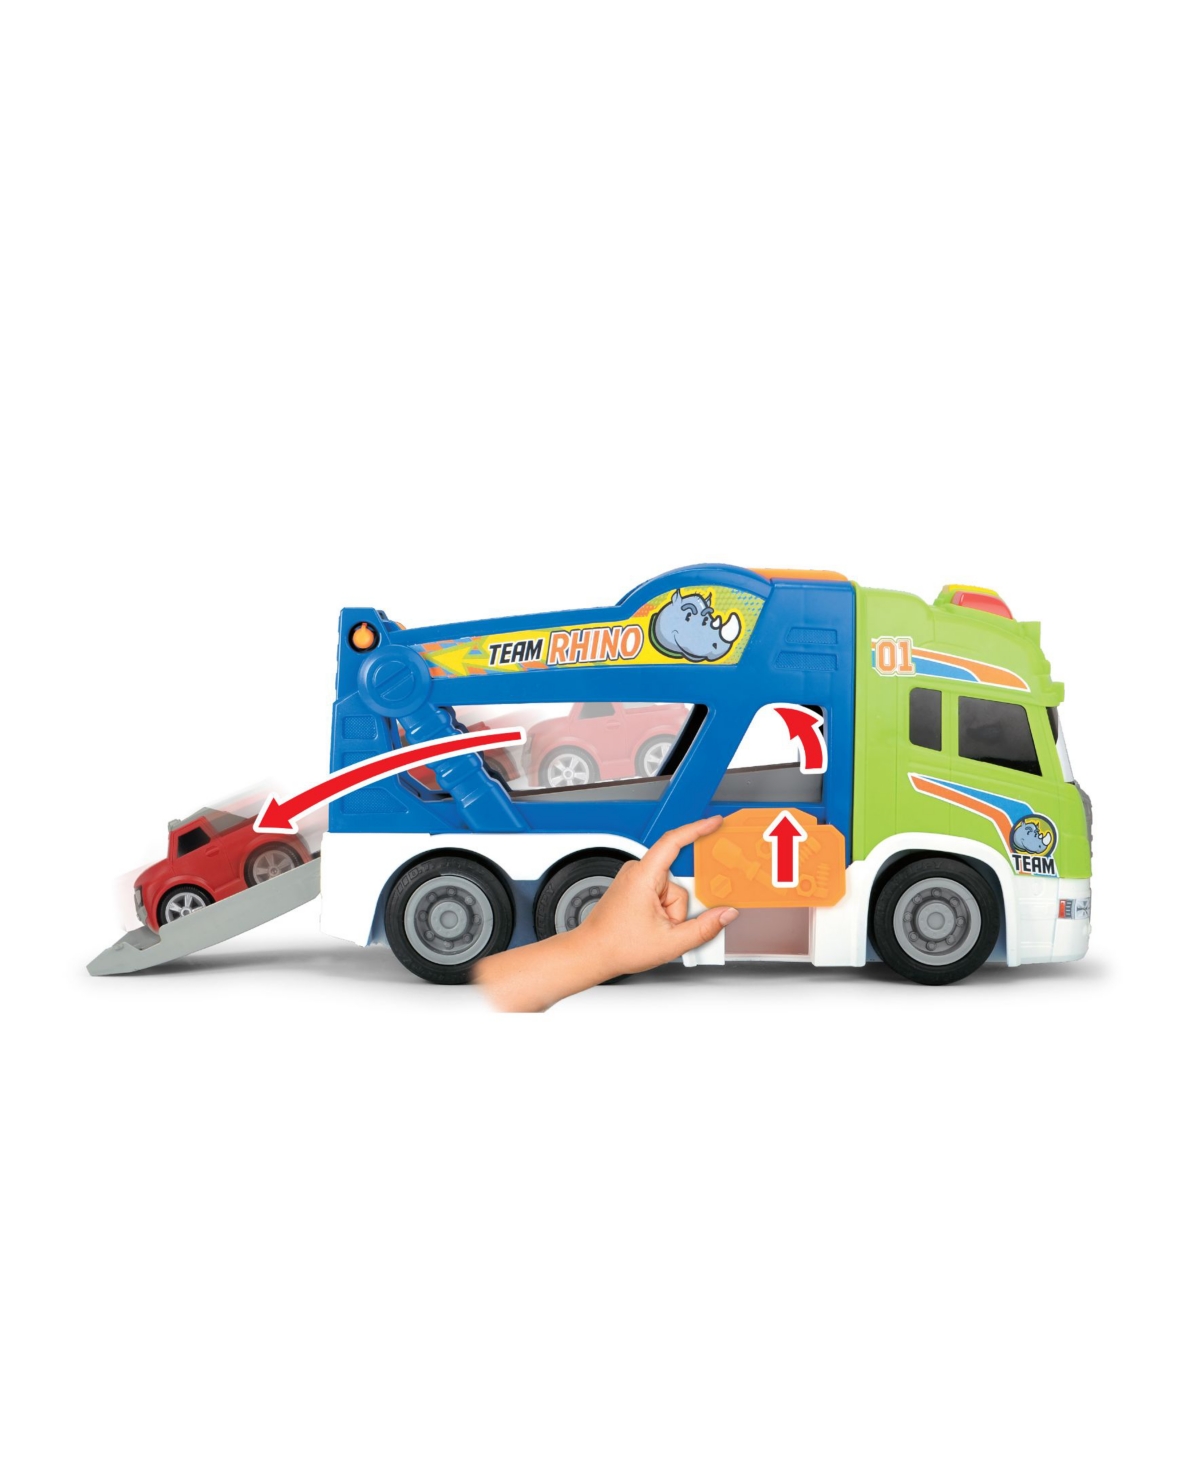 Shop Dickie Toys Hk Ltd - 16" Happy Scania Car Transporter Pre-school Vehicle With Extra Car In Multi